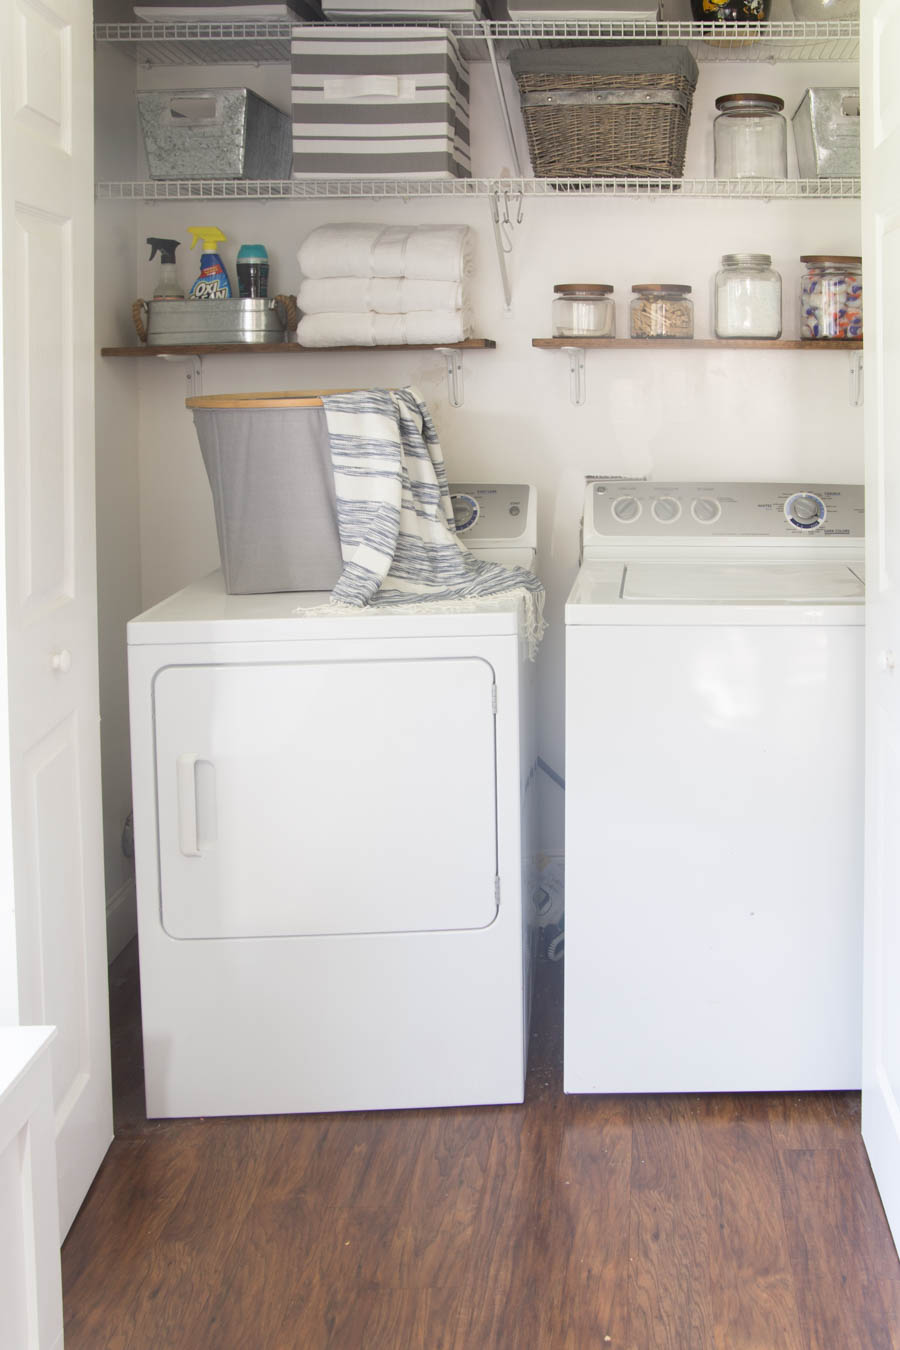 There is a washer and dryer tucked away in a closet with shelves.